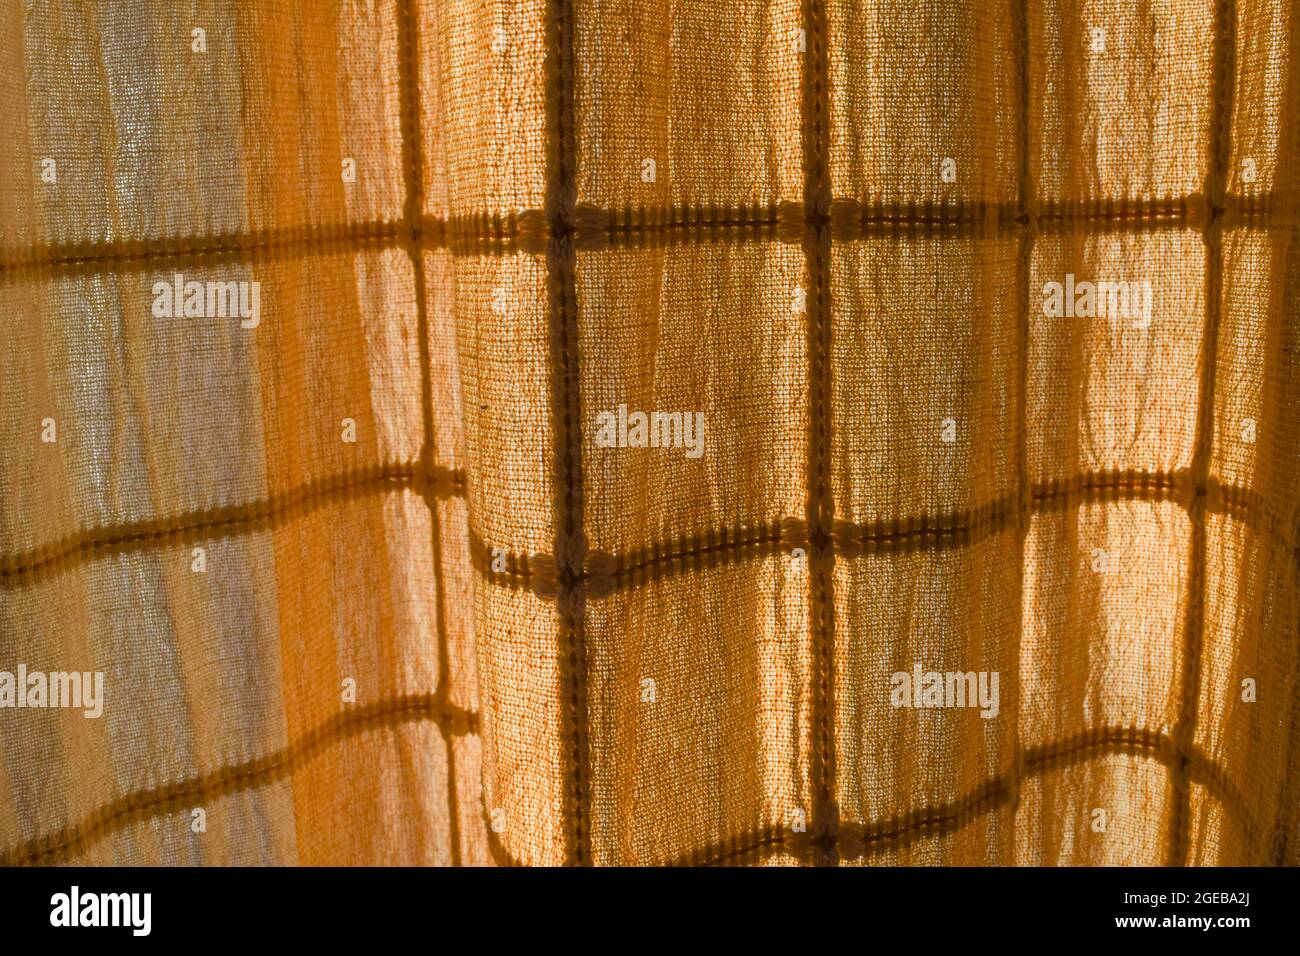 Door curtains with semi transparent thin cloth textile fabric with square pattern design. Morning sunglight drapes indian house interiors Stock Photo